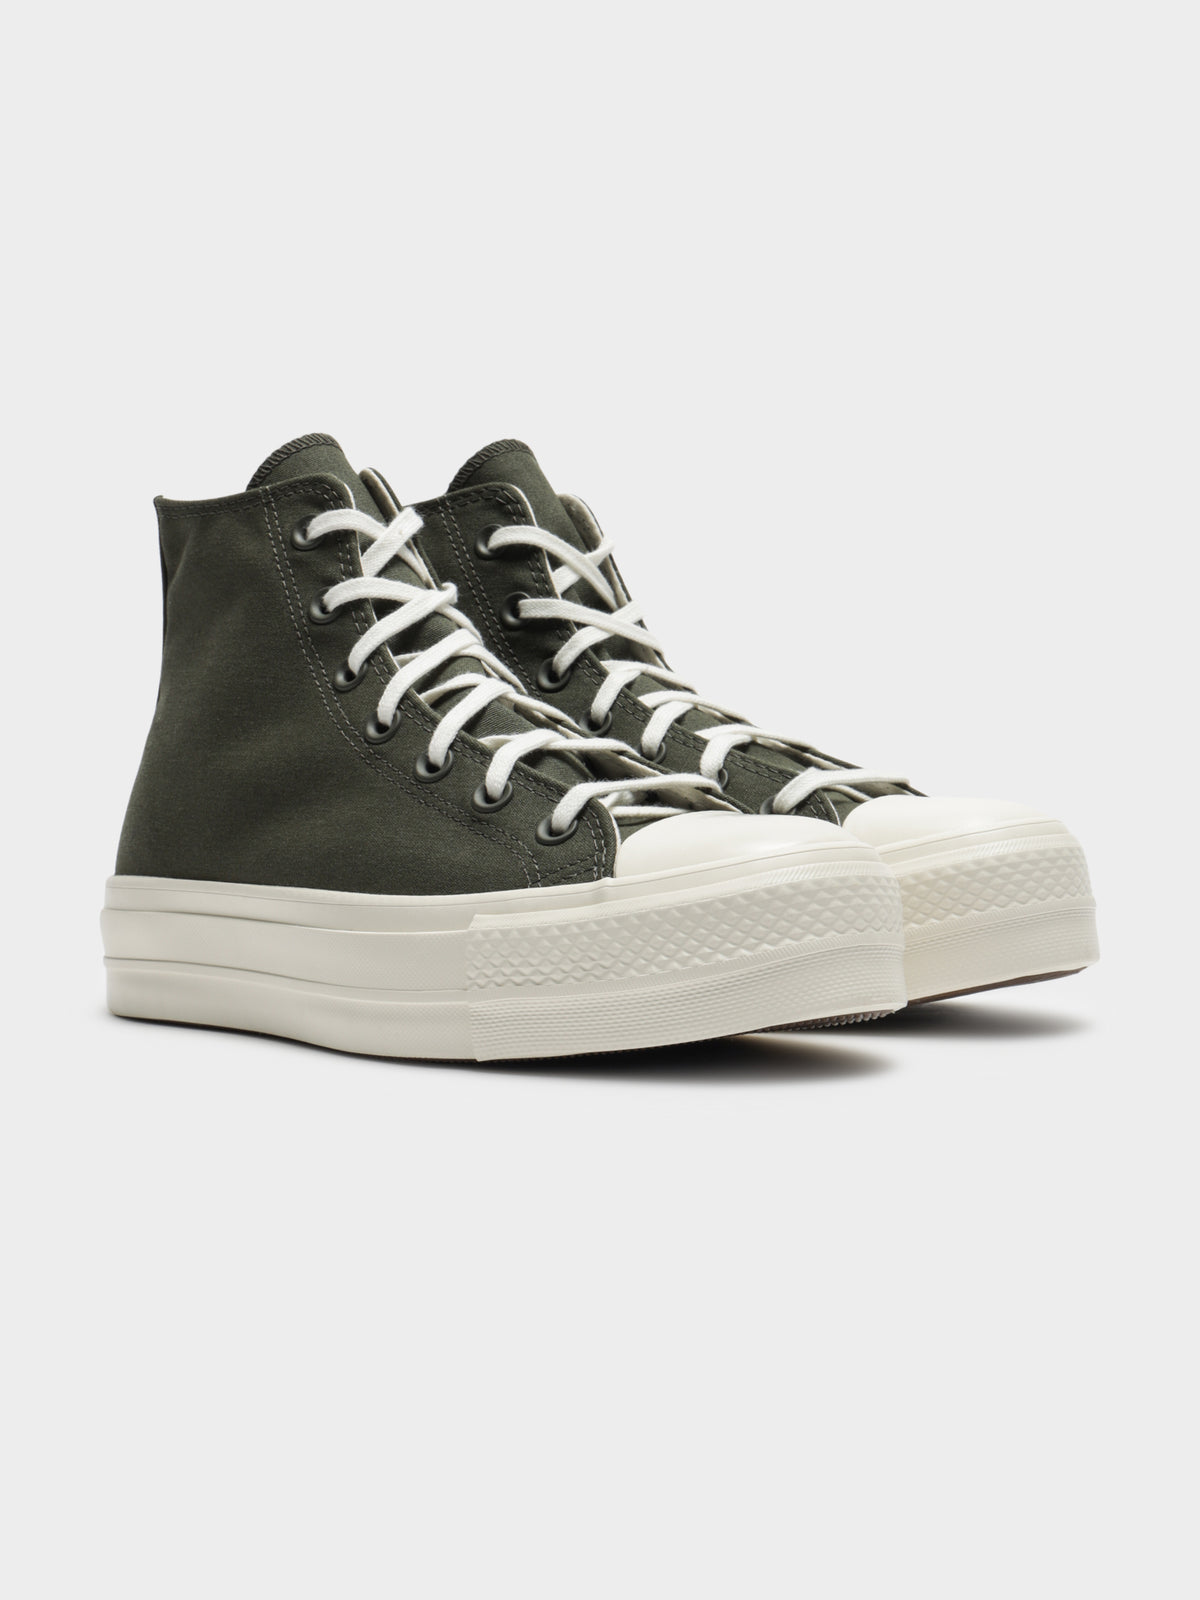 Womens Chuck All Star Recycled Platform Hi Sneakers in Khaki